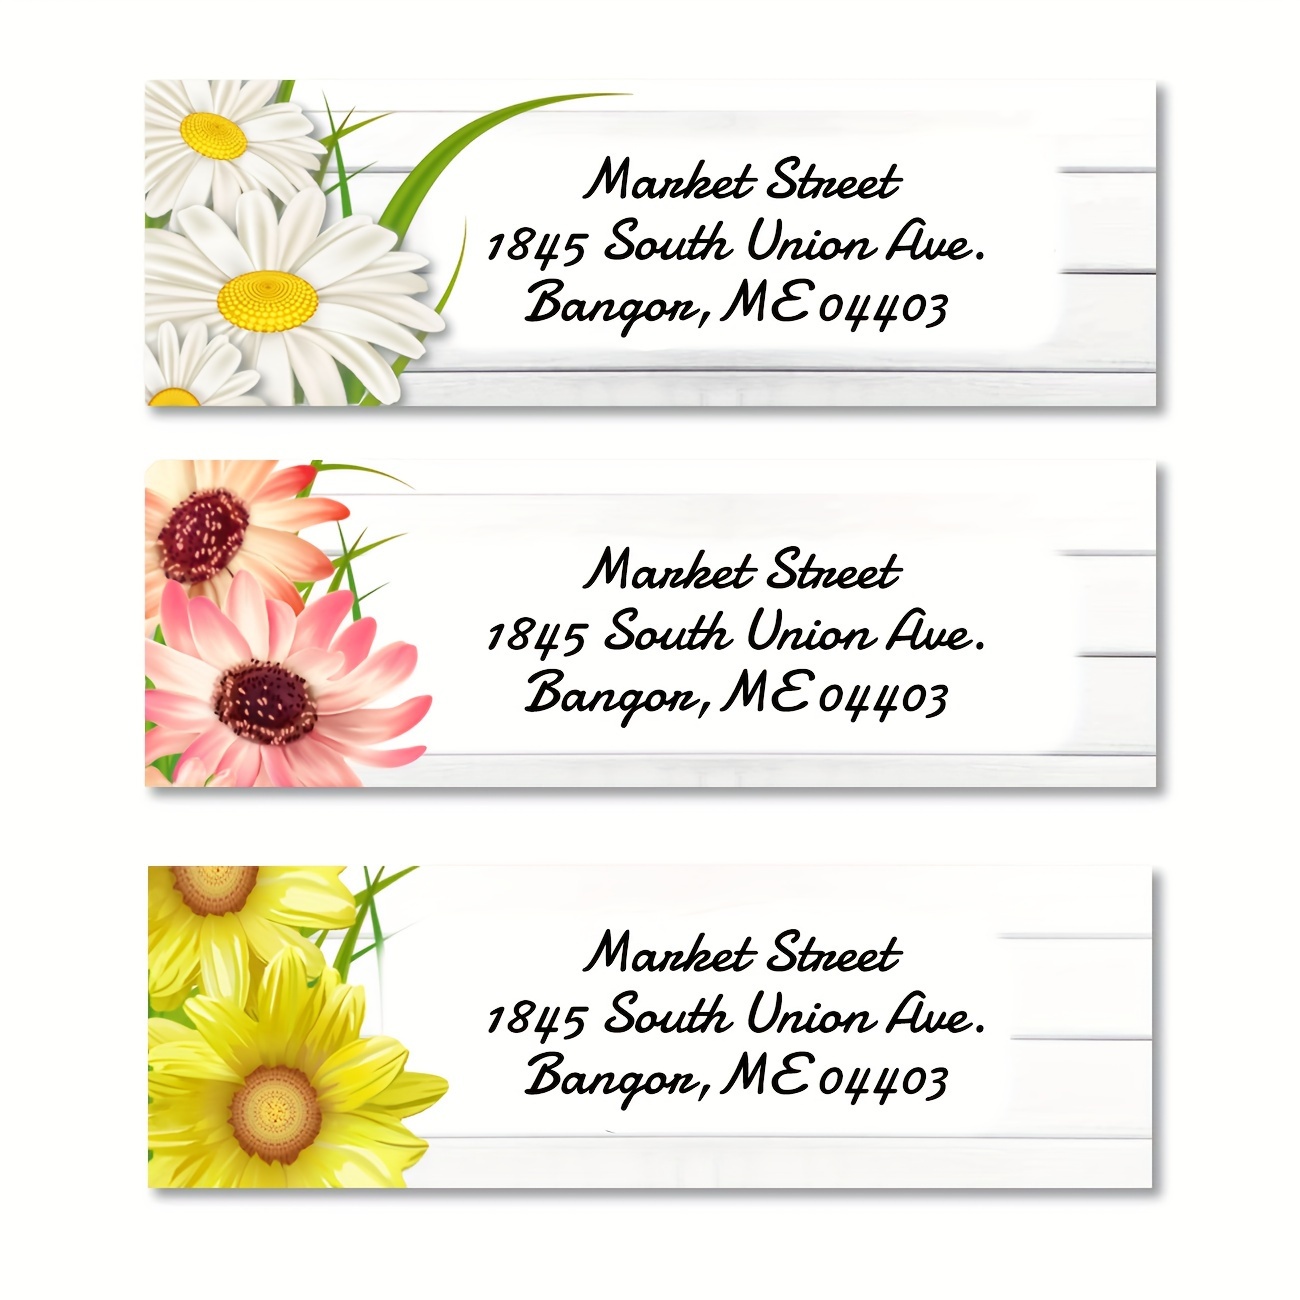 

[customized] Personalized Return Address Labels - 10 Designs, Set Of 140, Small Size 2.5 Inches X 0.75 Inches, Self-adhesive Flat Labels, Custom Self-adhesive Stickers